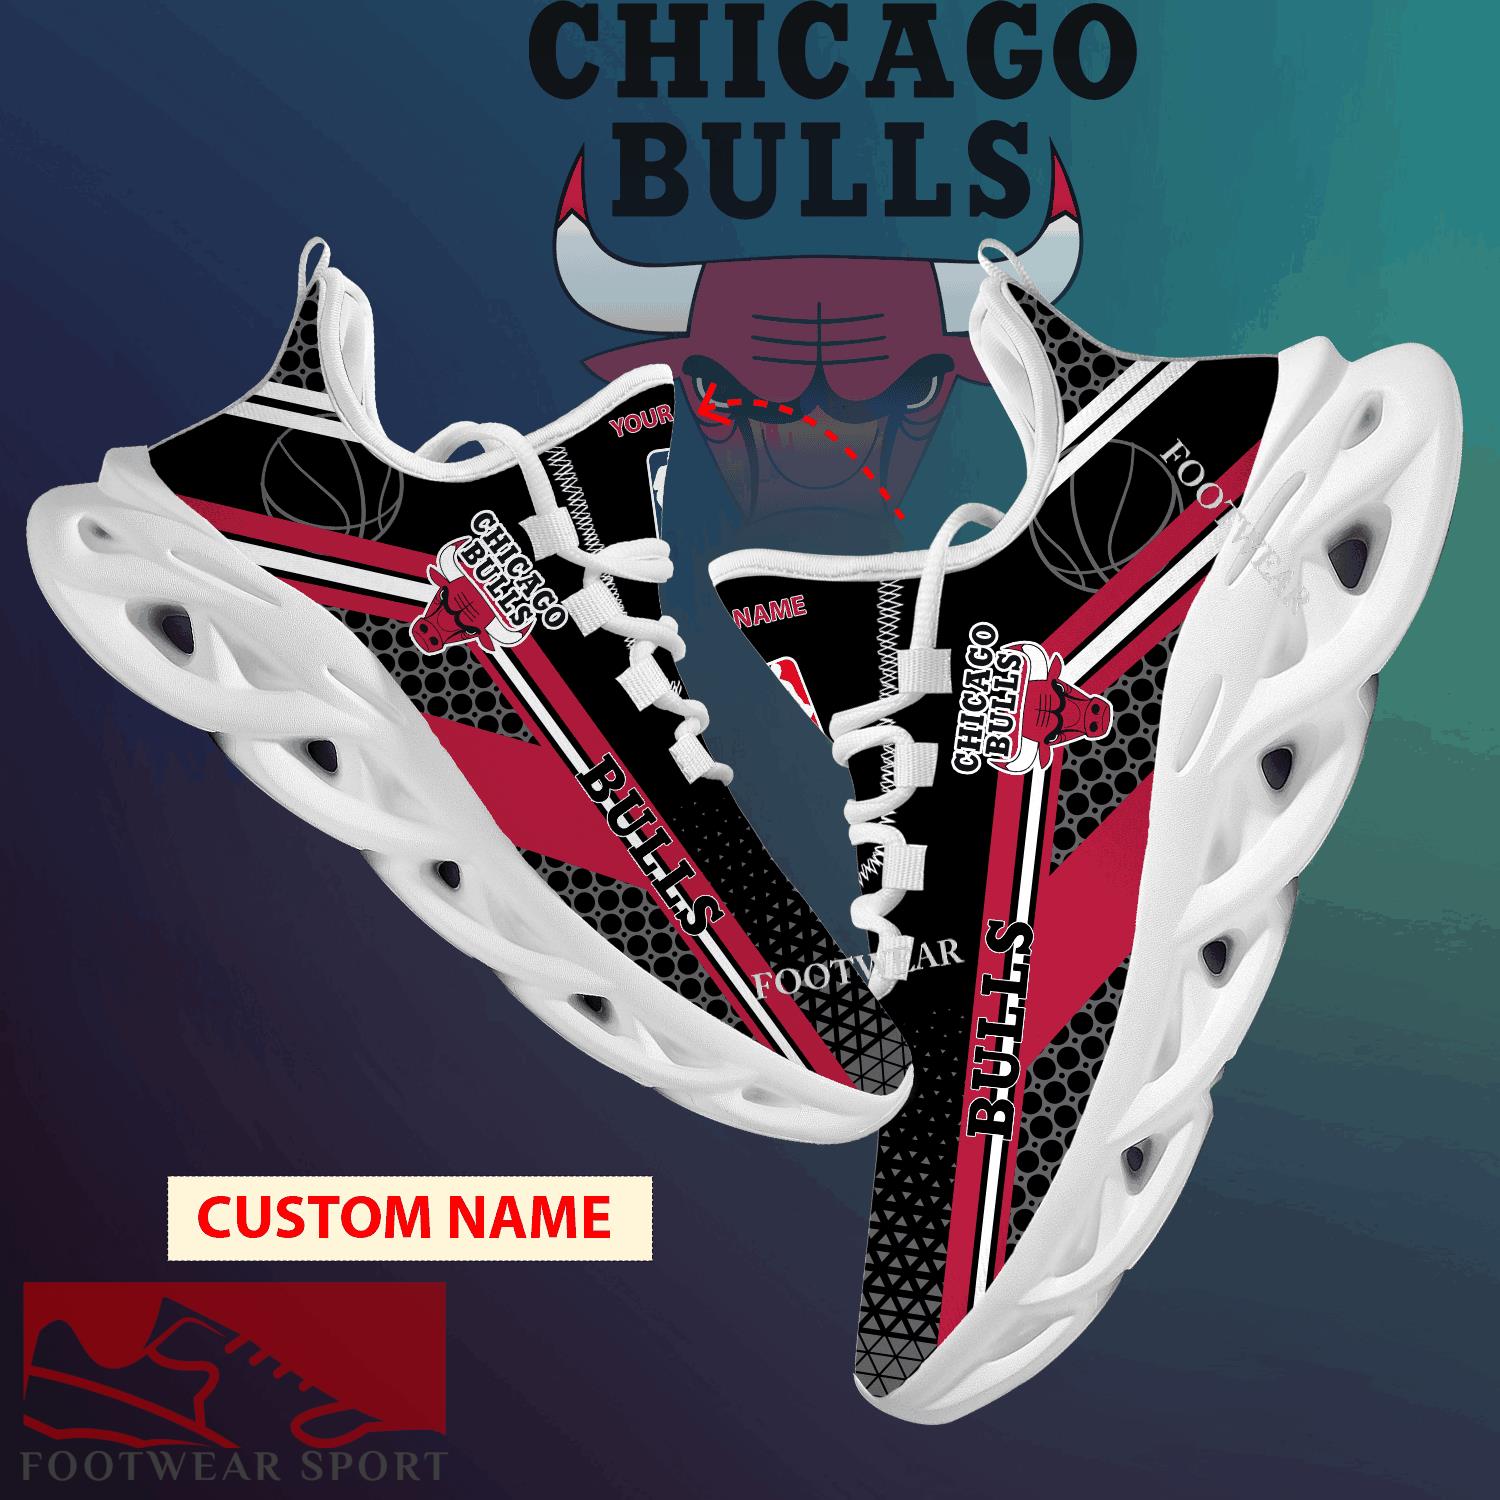 Chicago Bulls Max Soul Shoes New Season Personalized For Men Women Running Sneaker Artistry Fans - NBA Chicago Bulls Max Soul Shoes New Season Personalized Photo 1